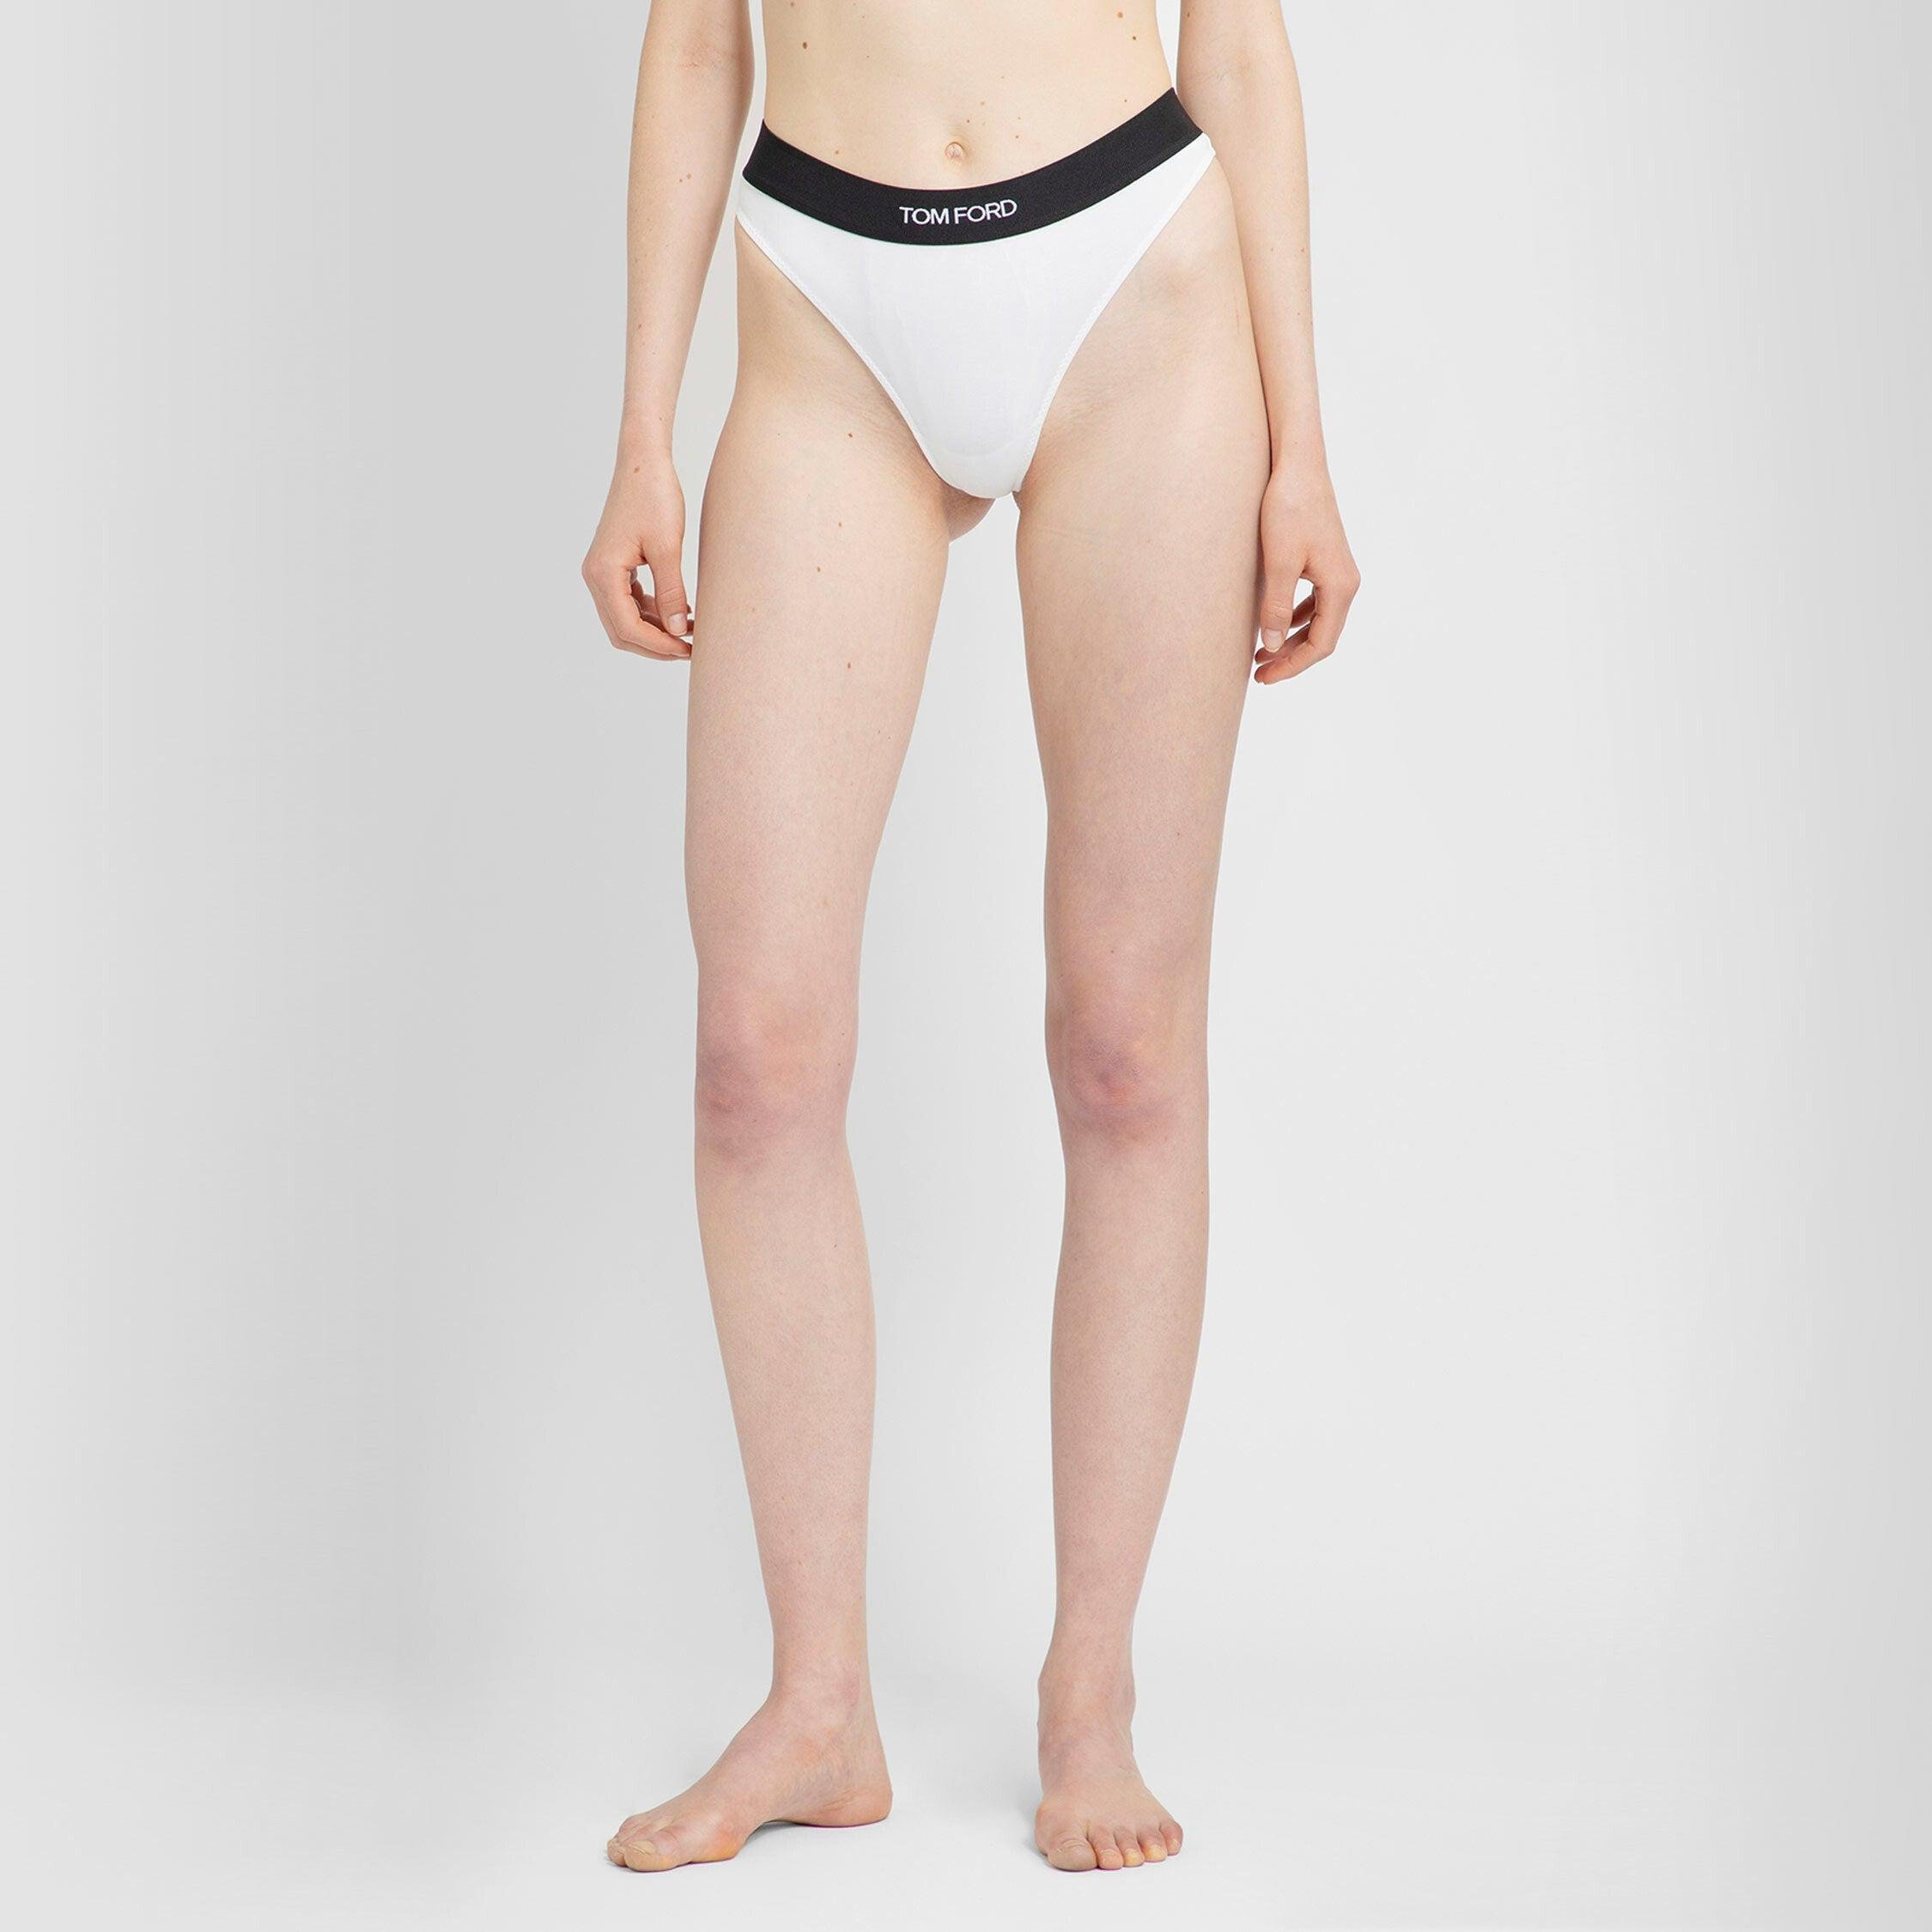 TOM FORD WOMAN WHITE LINGERIE by TOM FORD